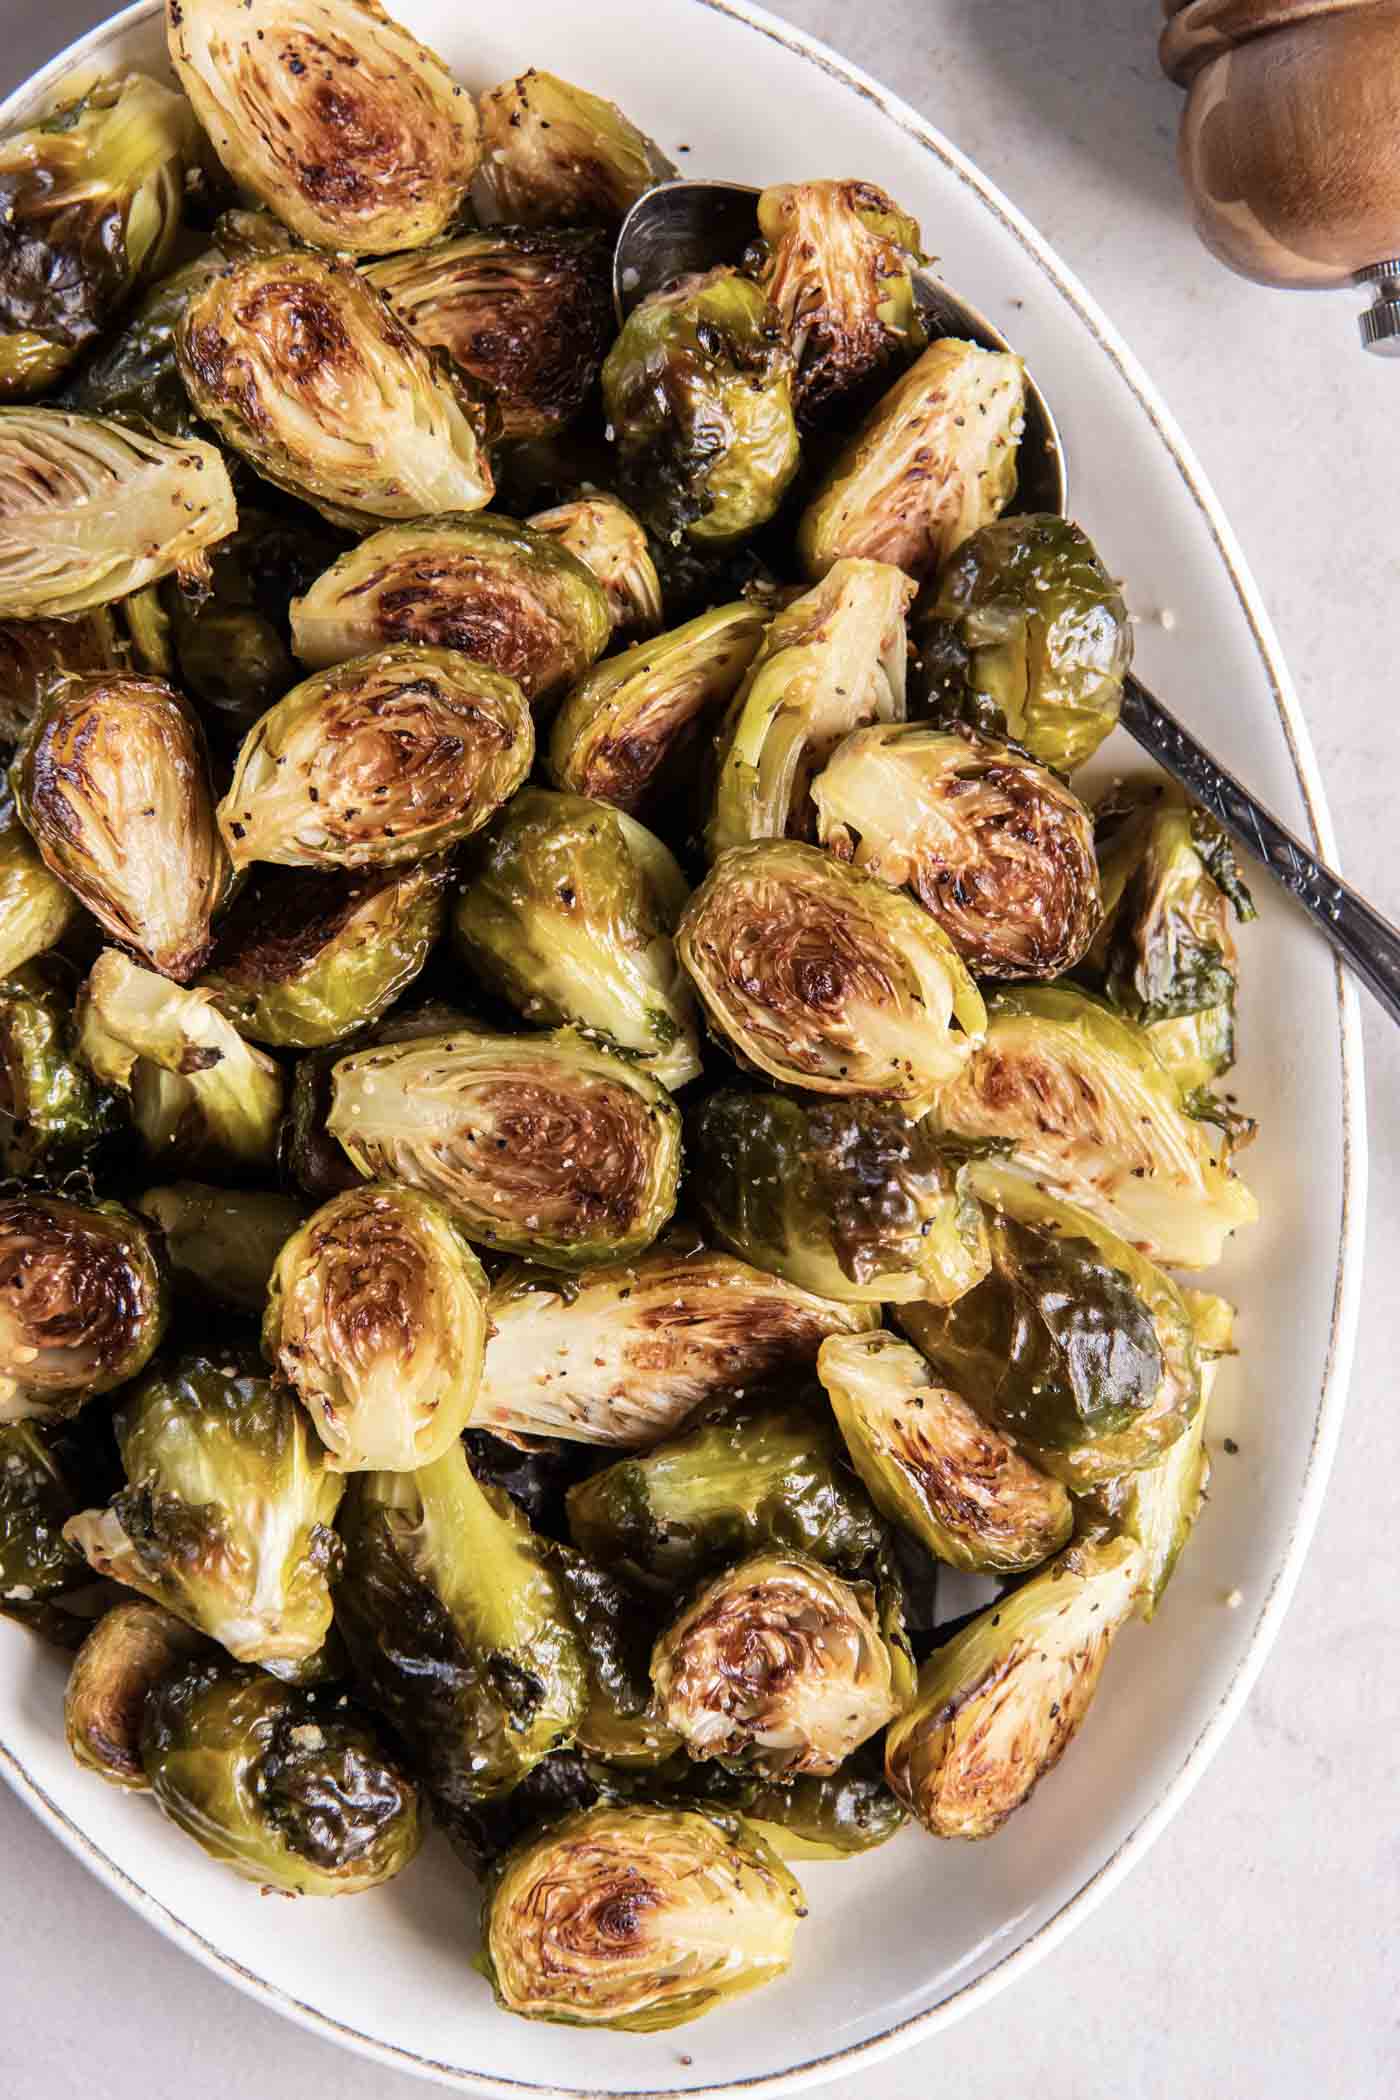 Roasted Brussels sprouts in an oval serving bowl with a serving spoon.